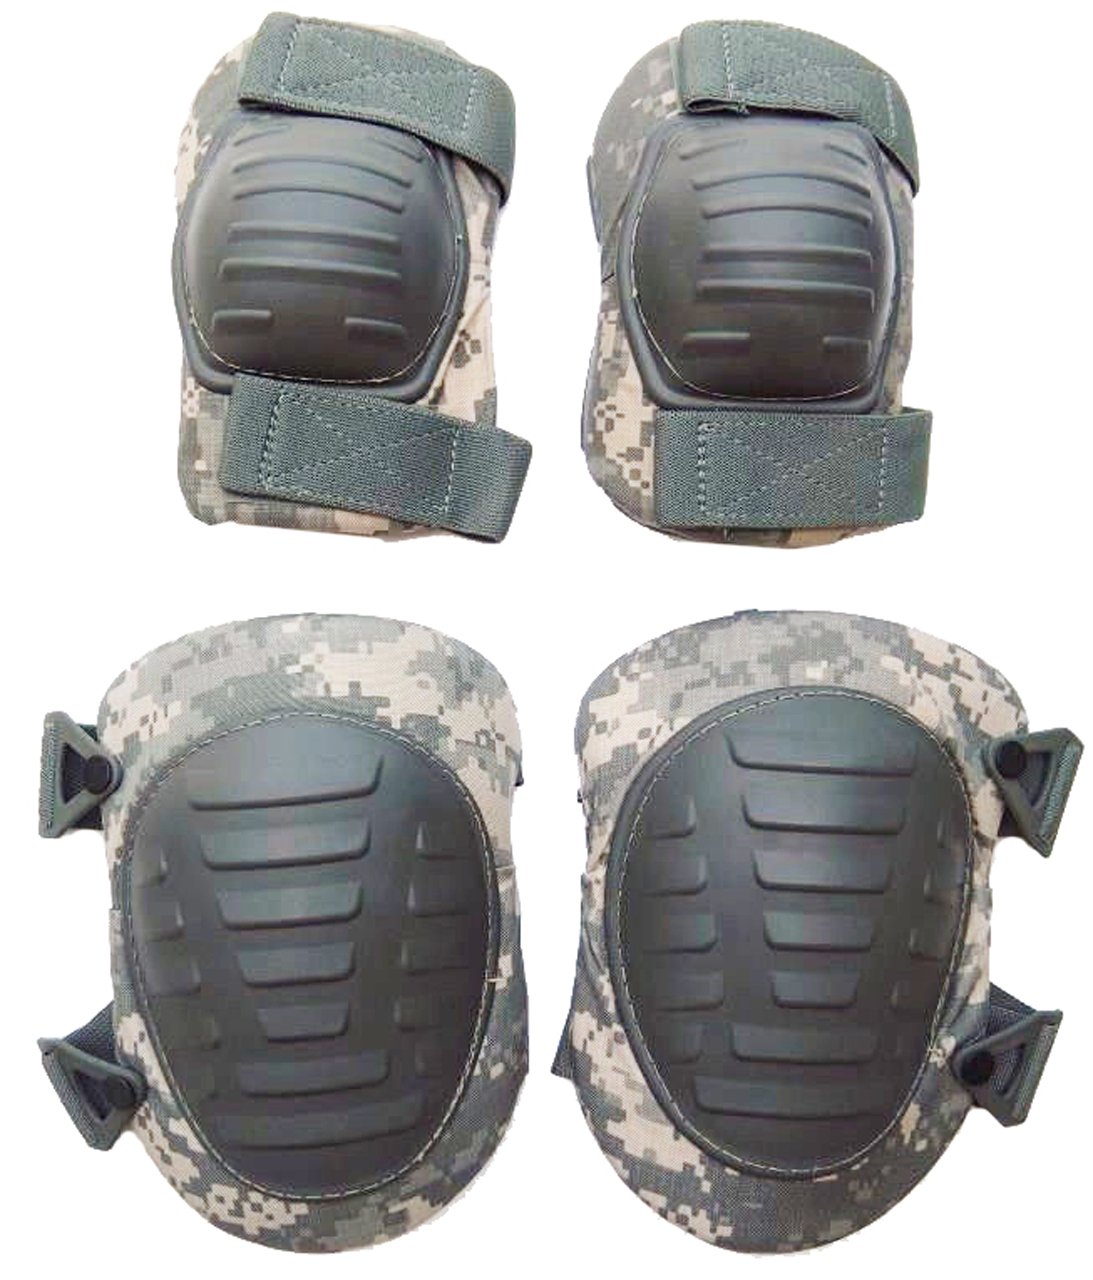 Military Outdoor Clothing 1053-N Previously Issued U.S. G.I. ACU Knee and Elbow Pad Set (New Style)